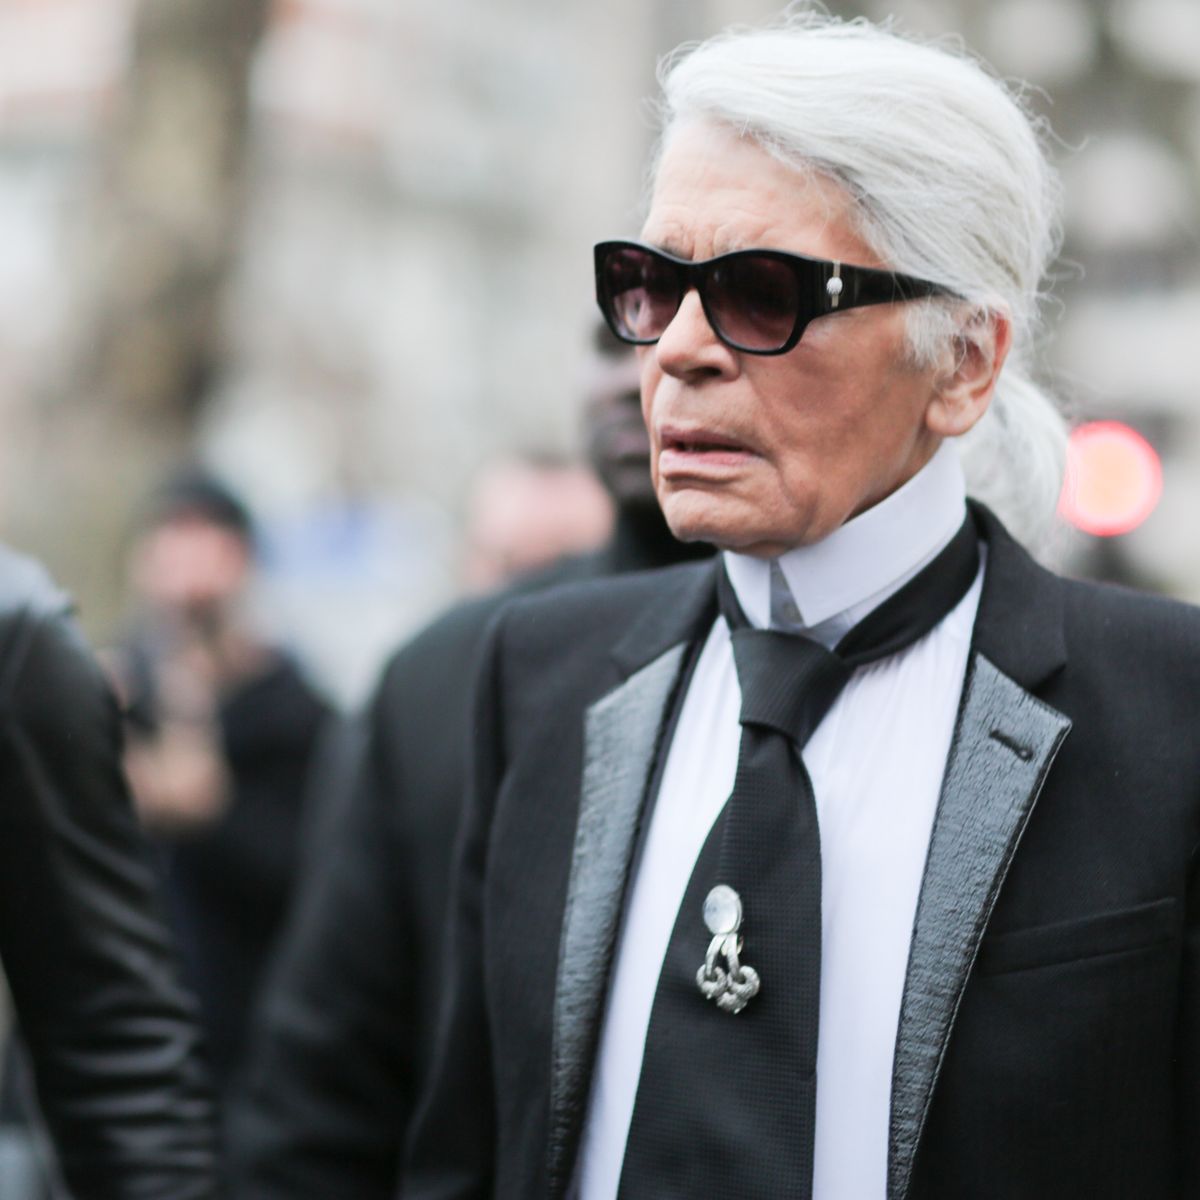 Penélope Cruz Recalls Her Last Night with Karl Lagerfeld Before His Death